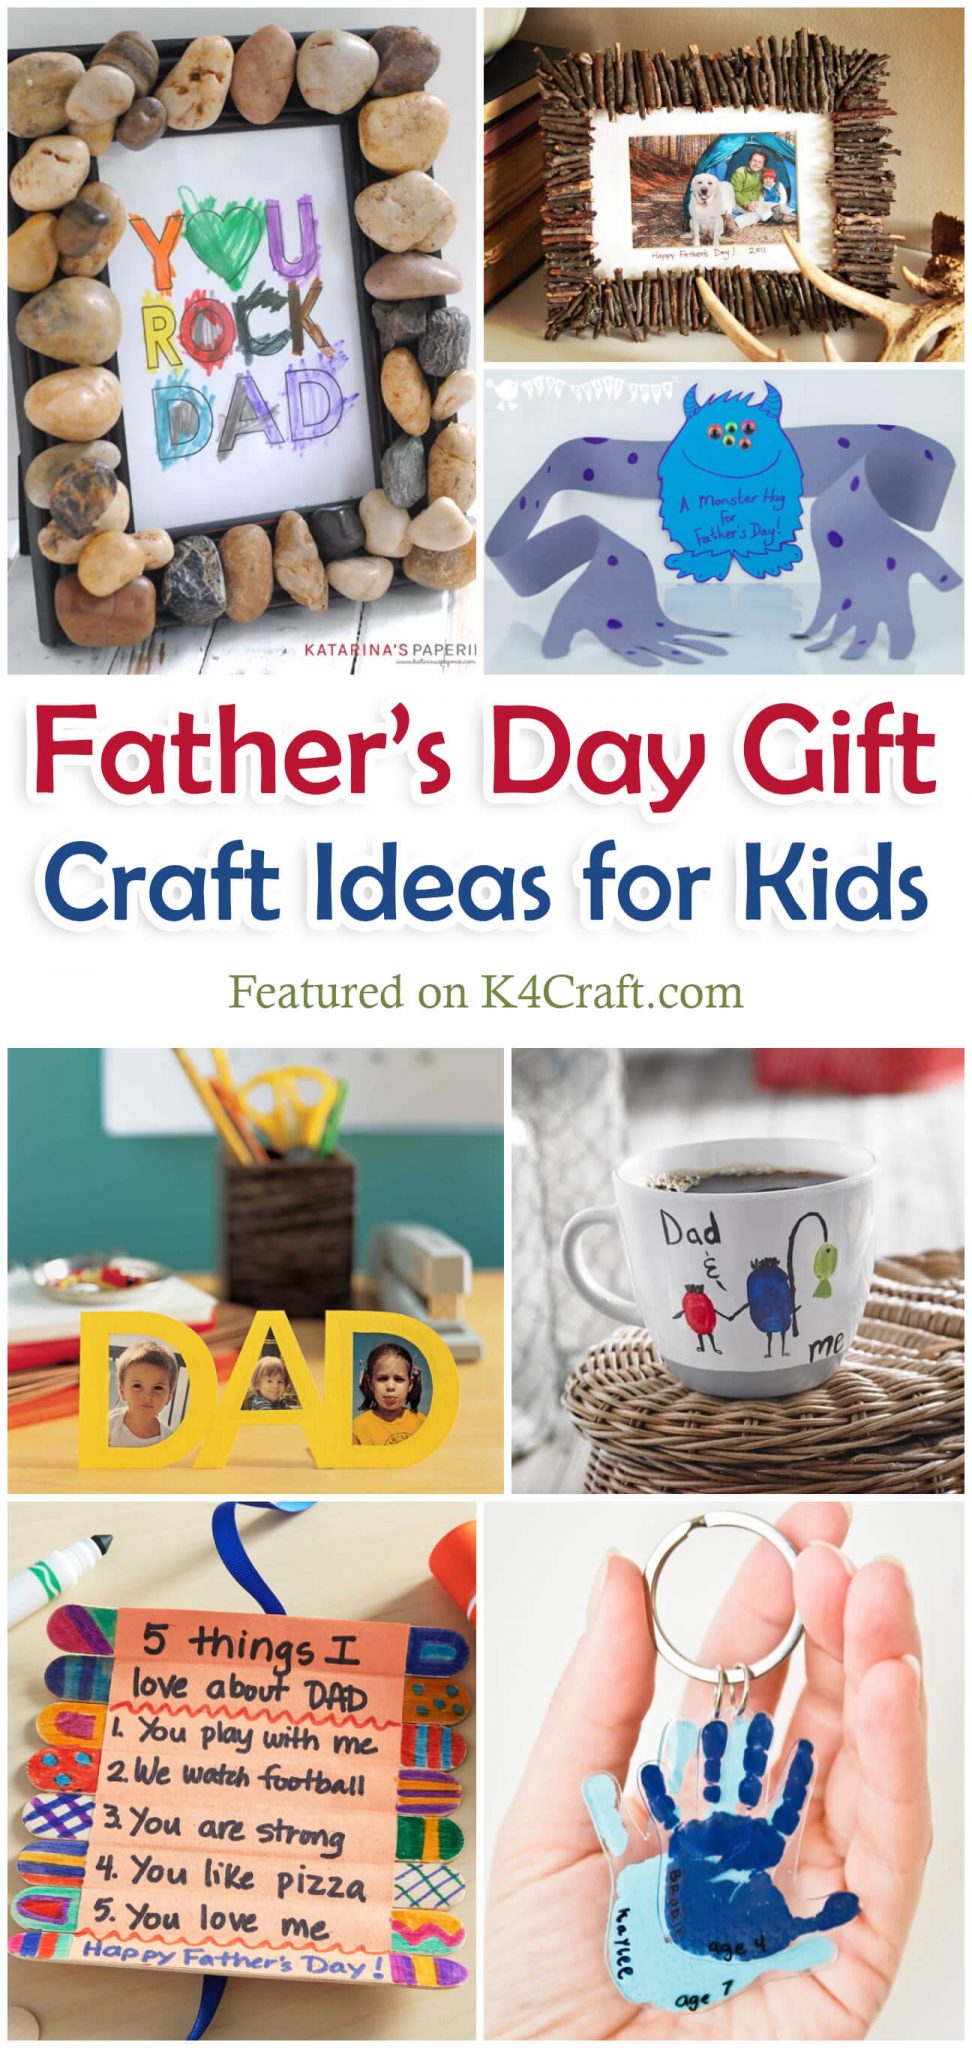 Father's Day Gift Craft Ideas for Kids to Make - K4 Craft